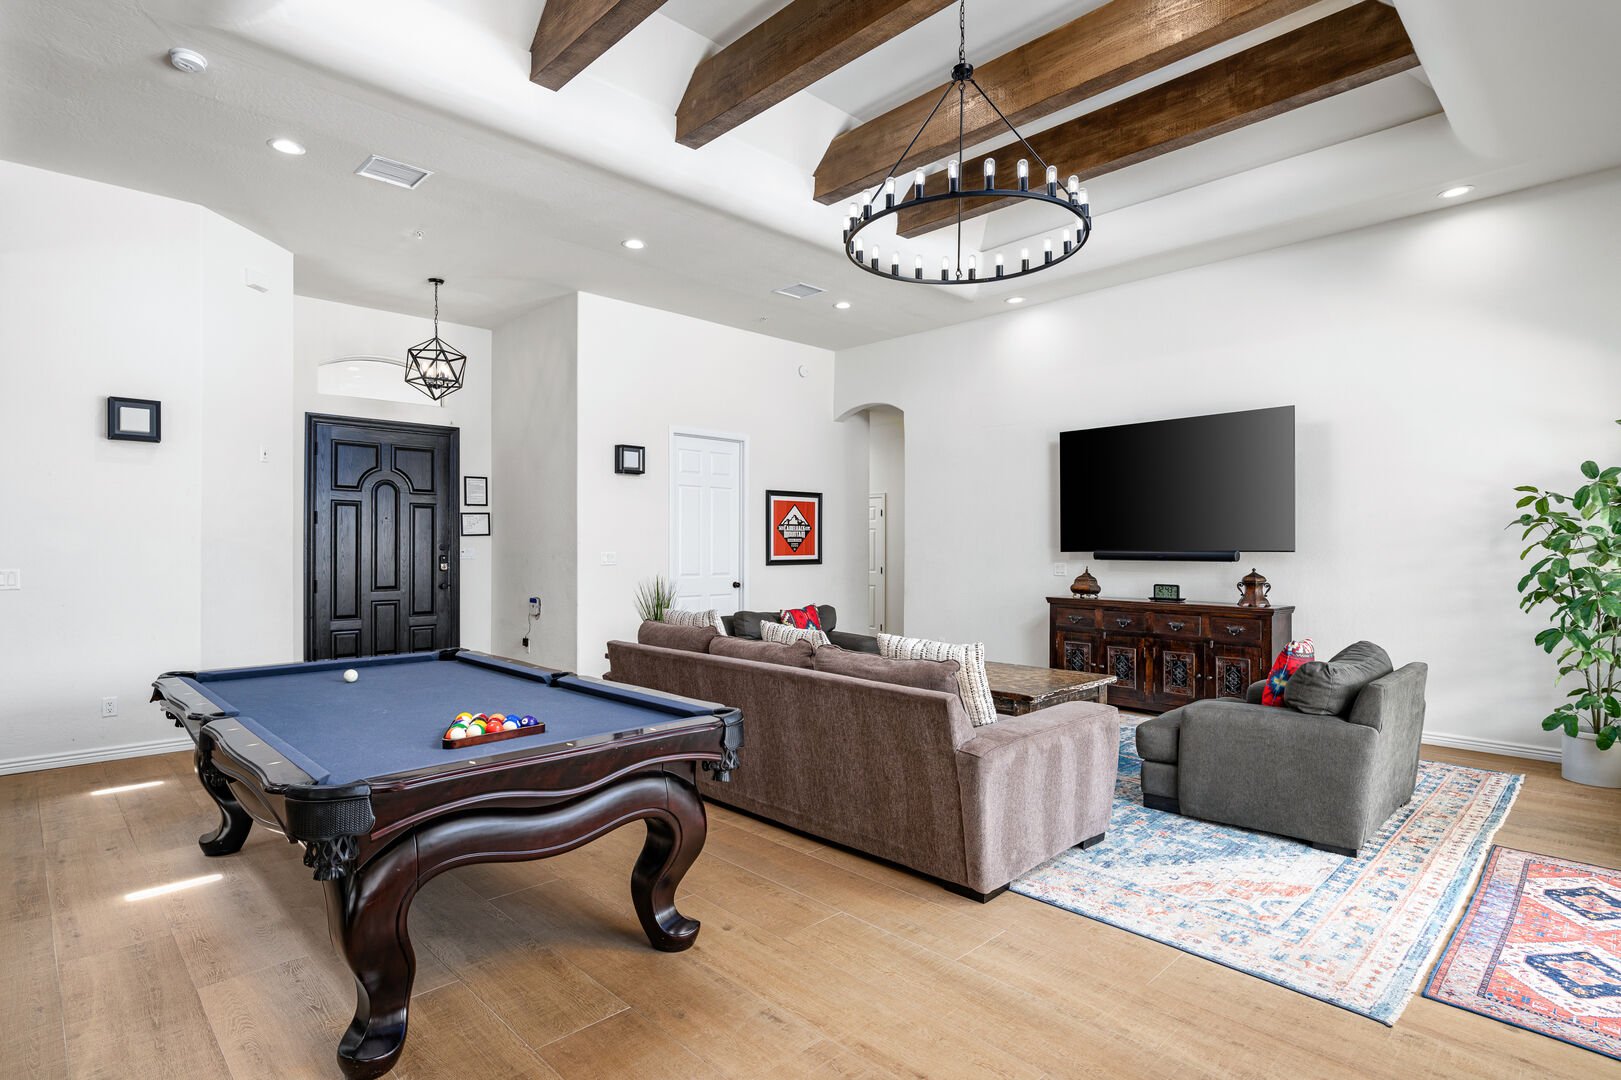 Pool table and living area